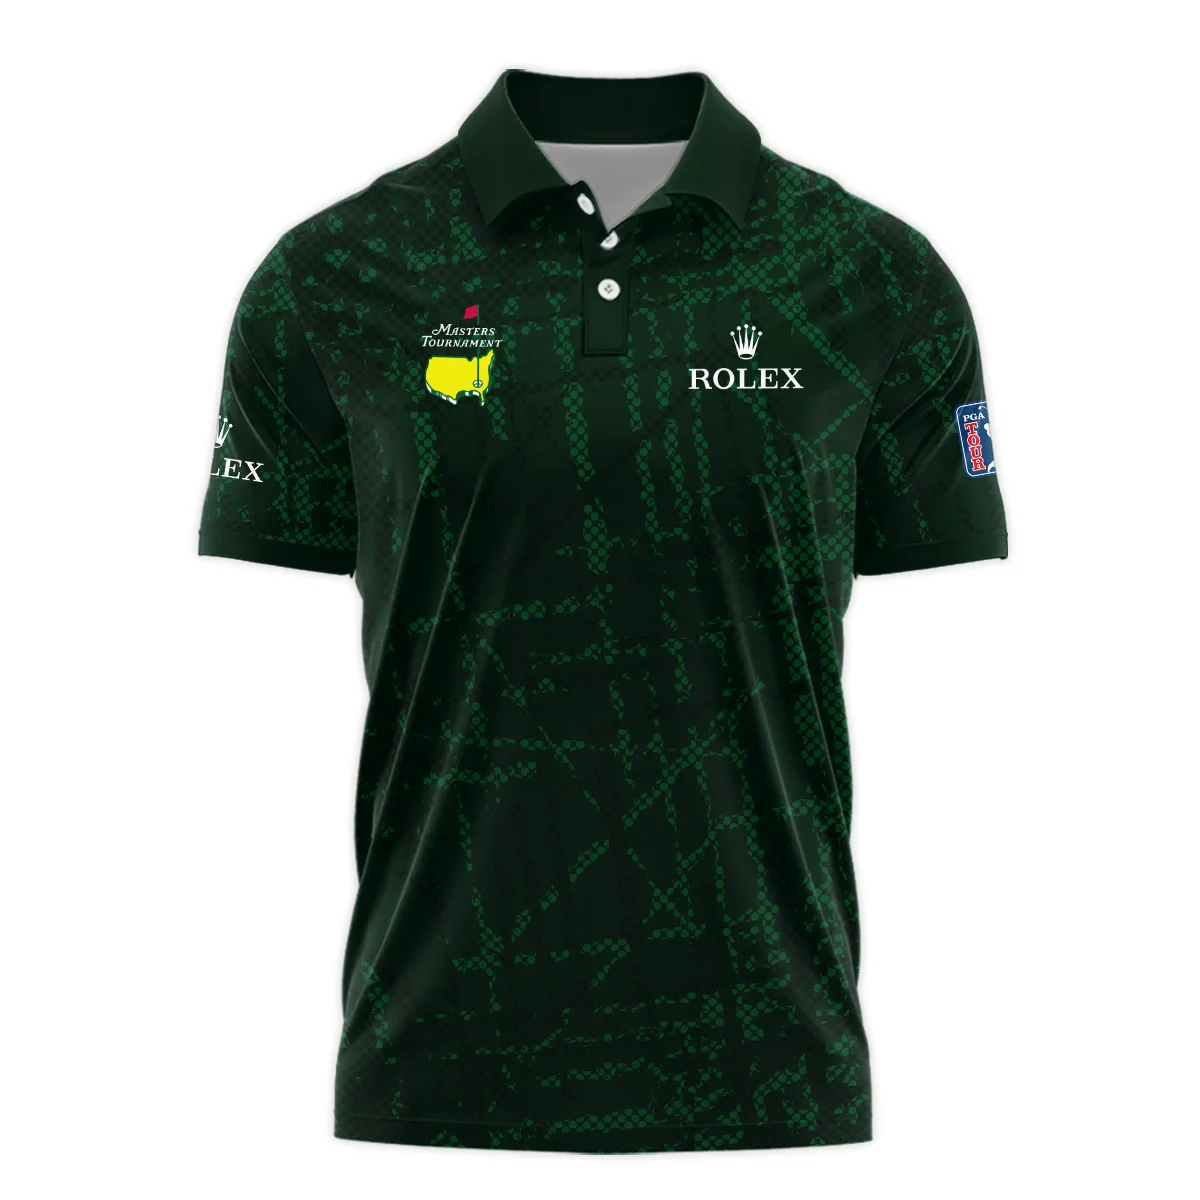 Masters Tournament Rolex Golf Pattern Halftone Green Vneck Polo Shirt Style Classic Polo Shirt For Men